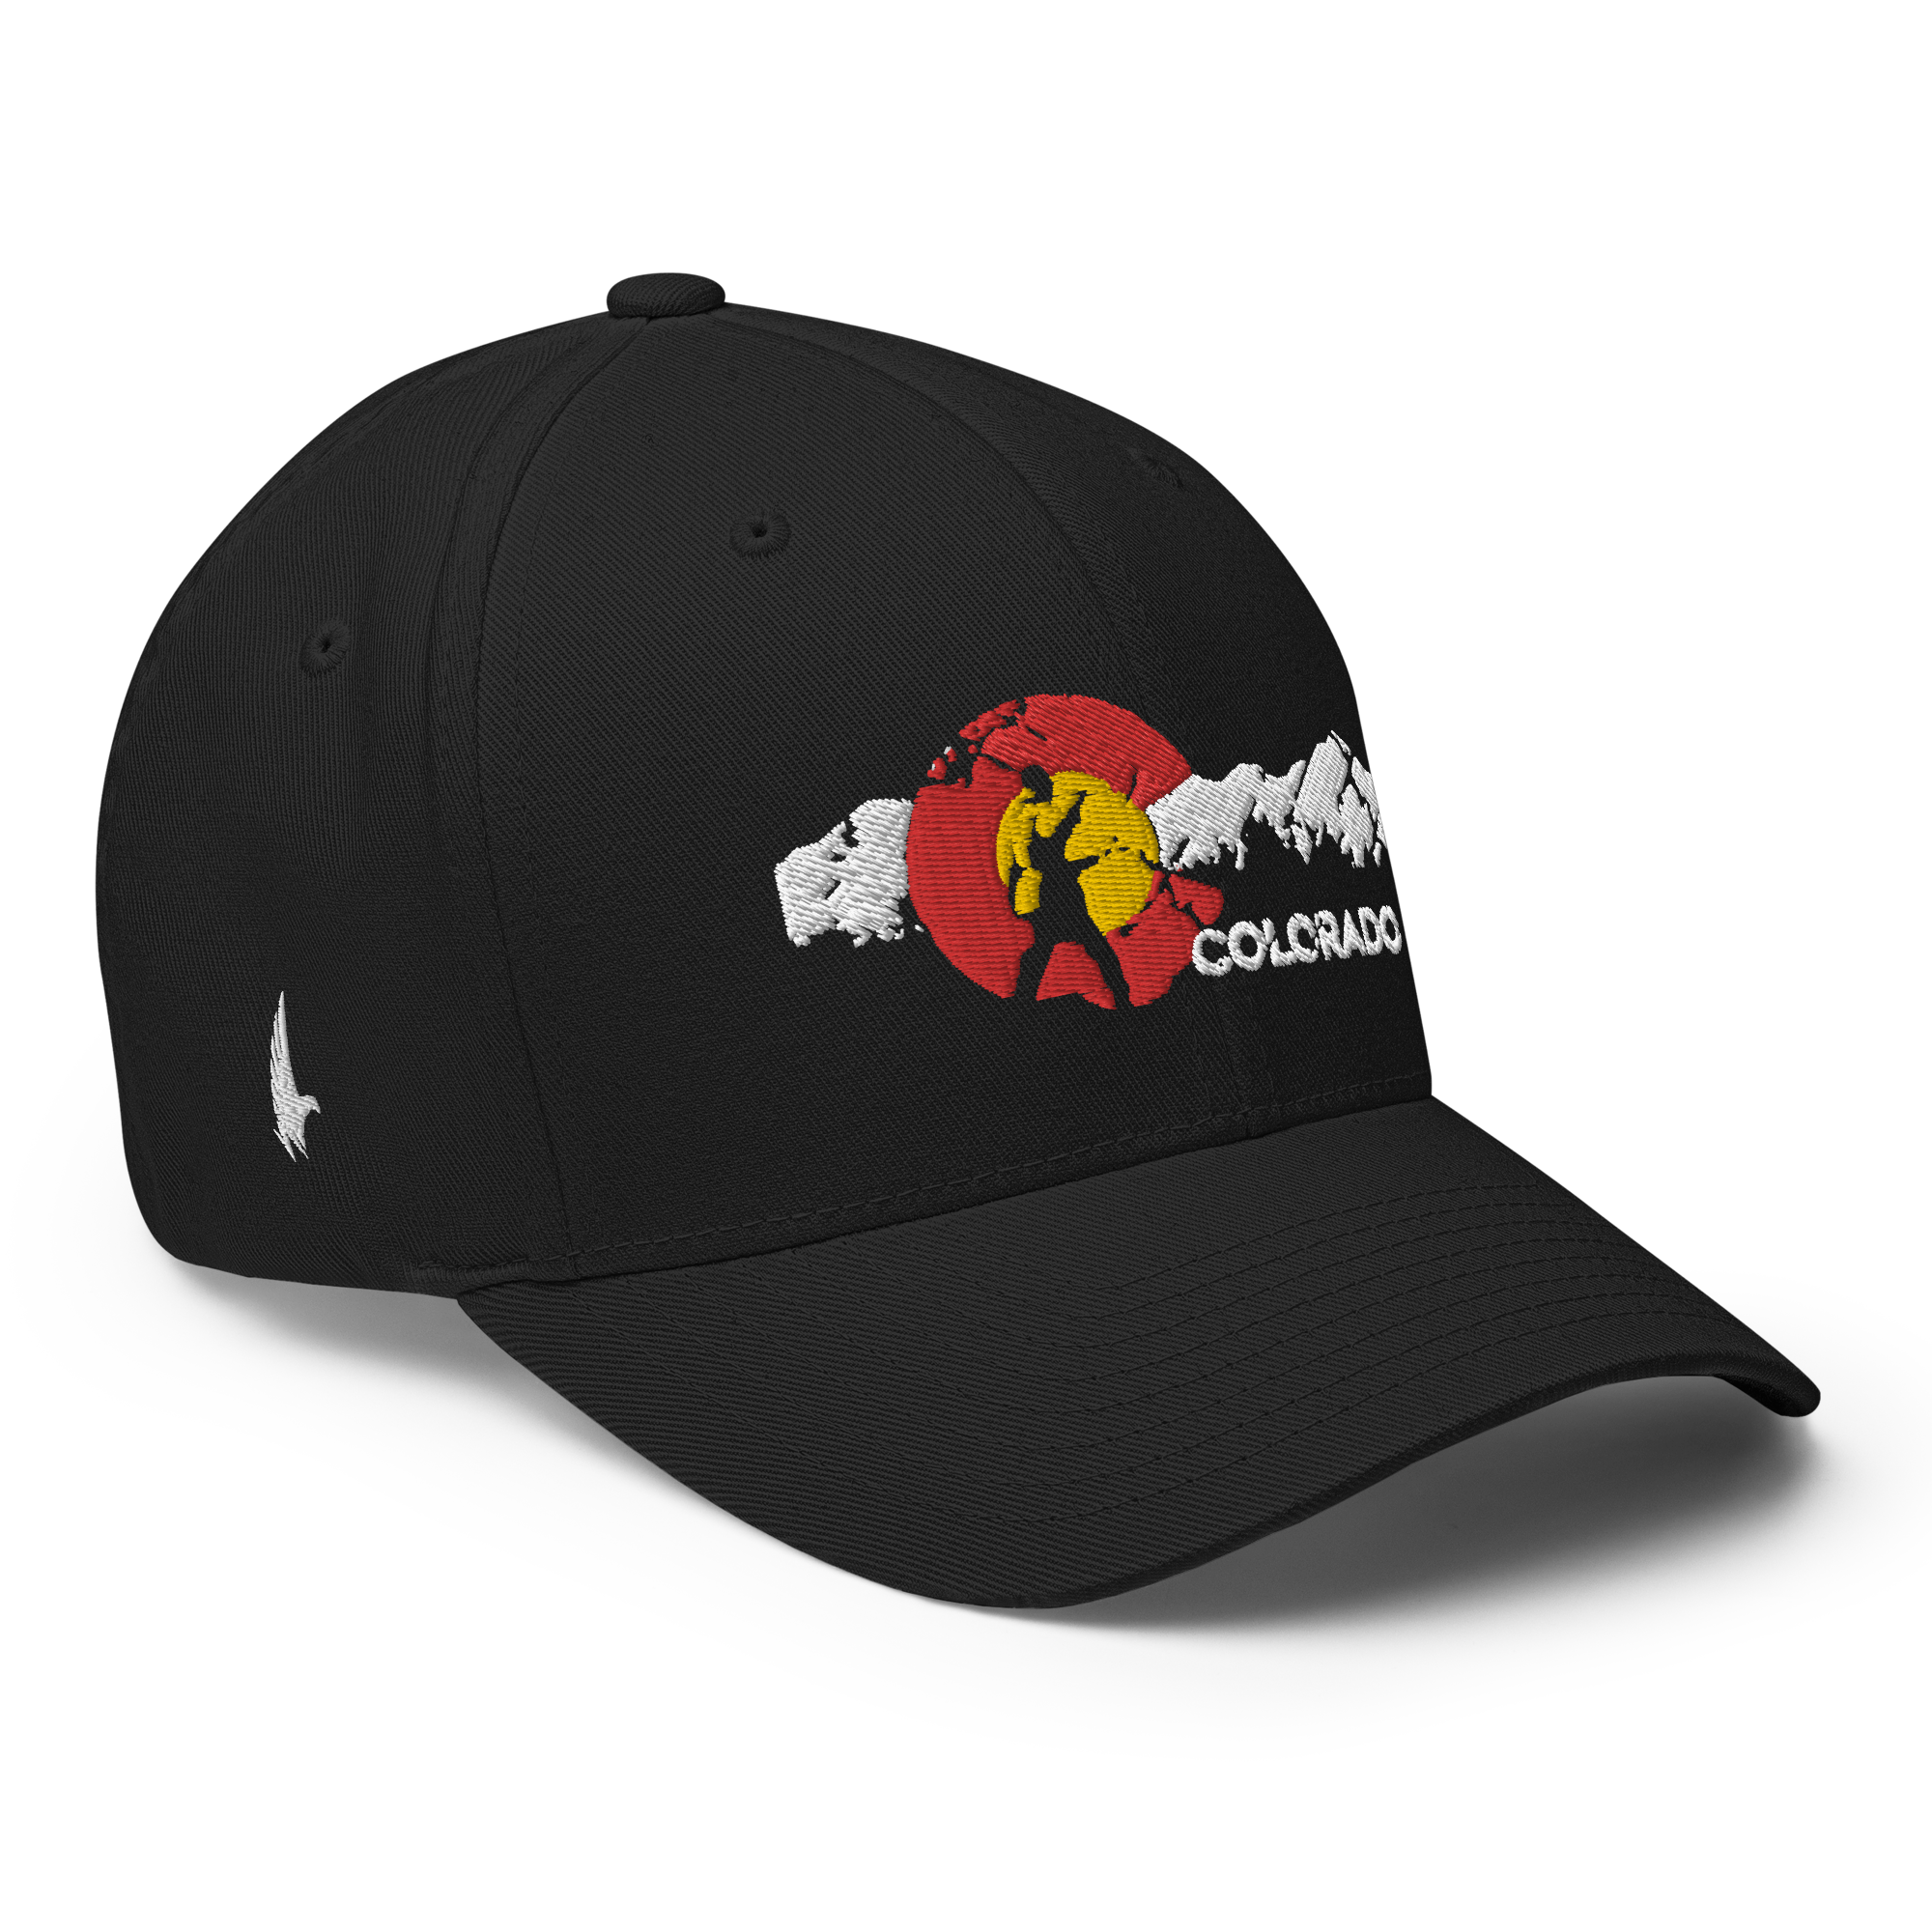 Adventures Of Colorado Fitted Hat Black Fitted - Loyalty Vibes